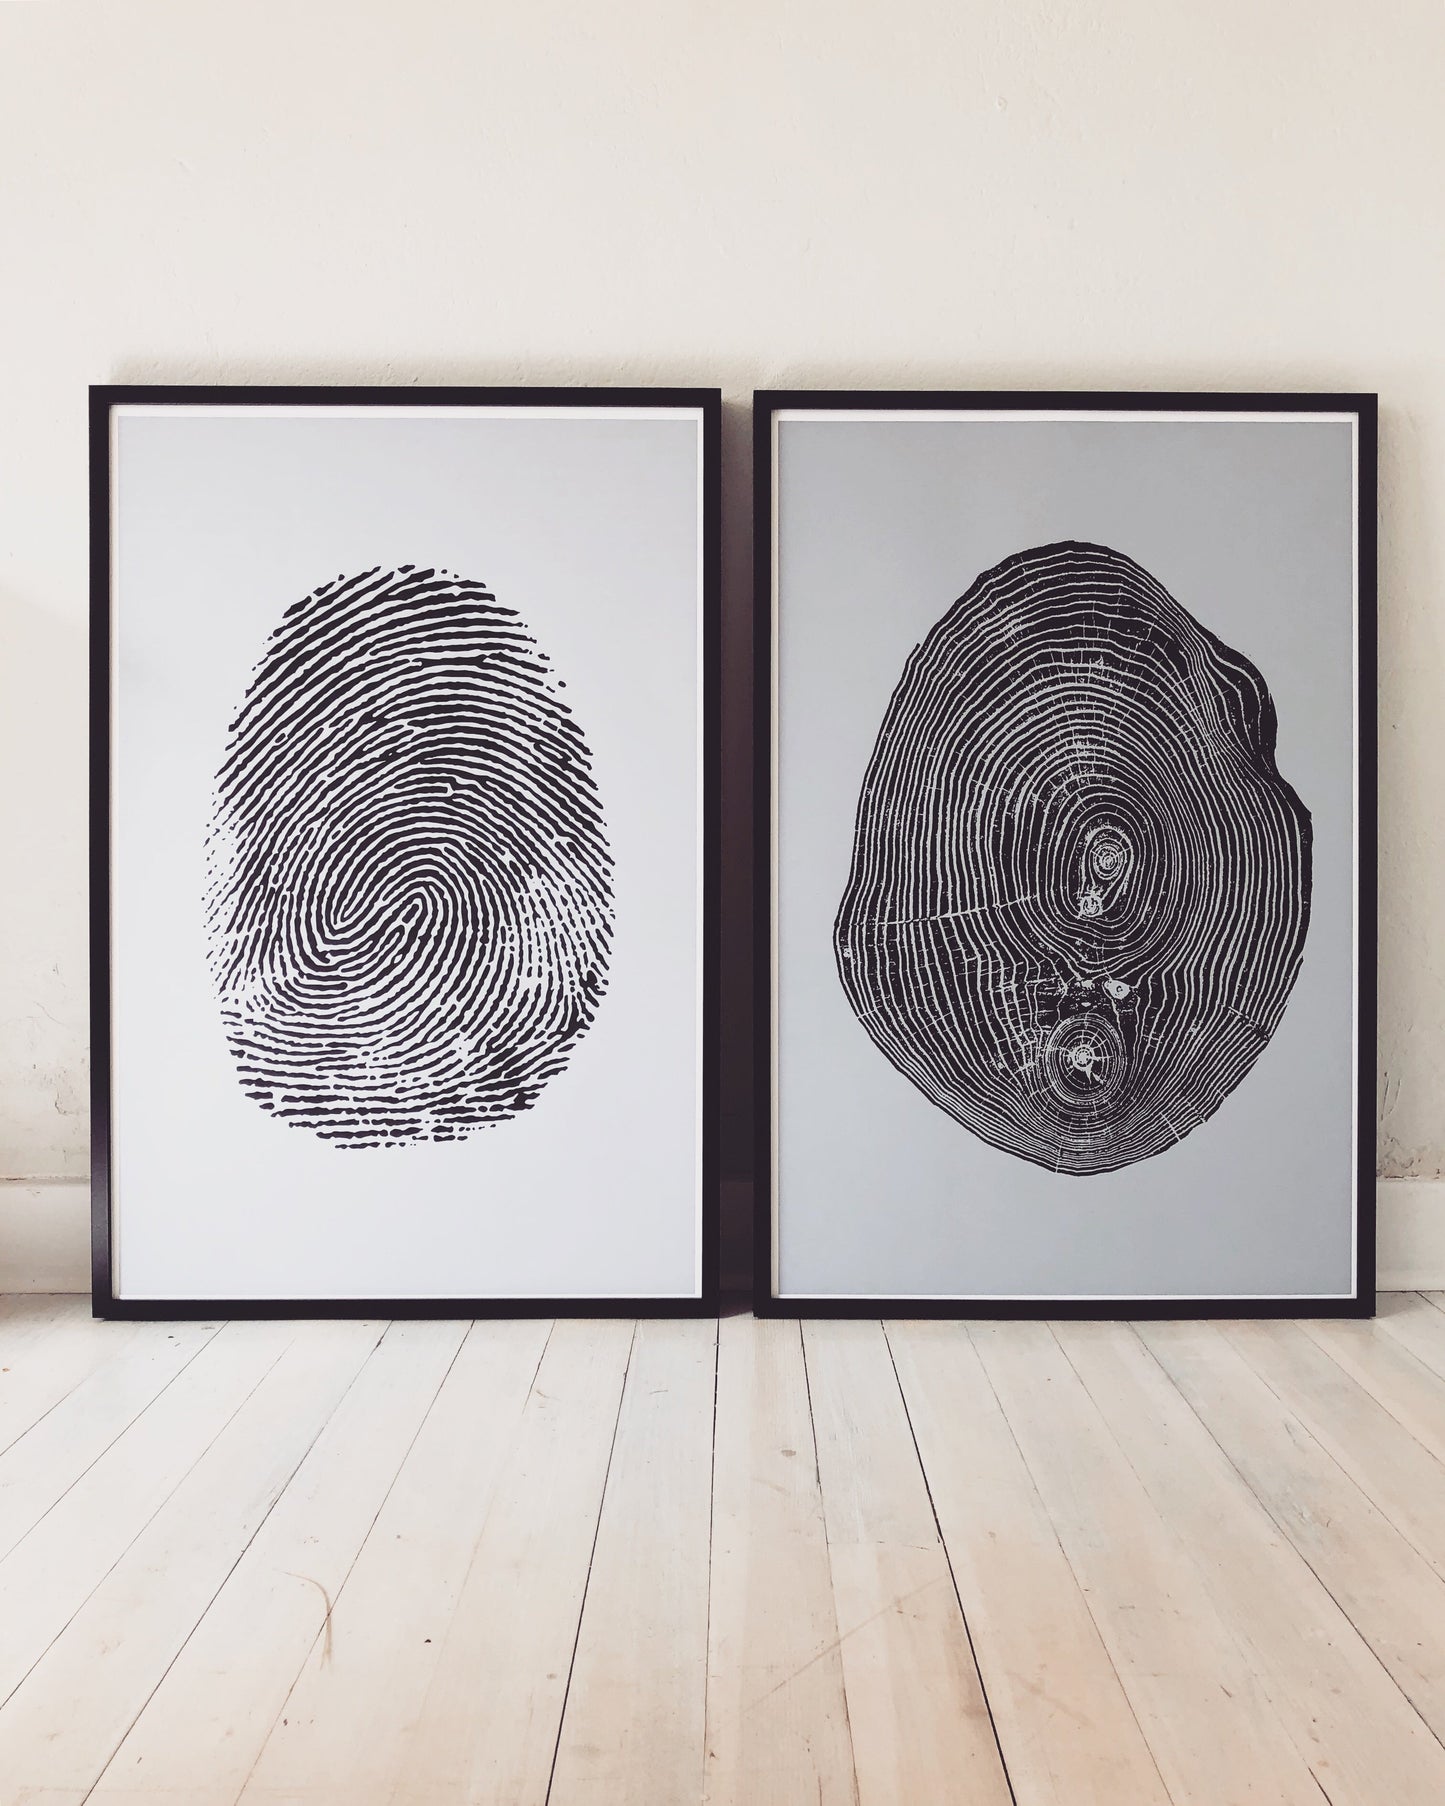 Copy of Customized fingerprint tree ring art, fingerprint art, tree ring print, human nature, nature lover gift, memorial gifts, honor gifts